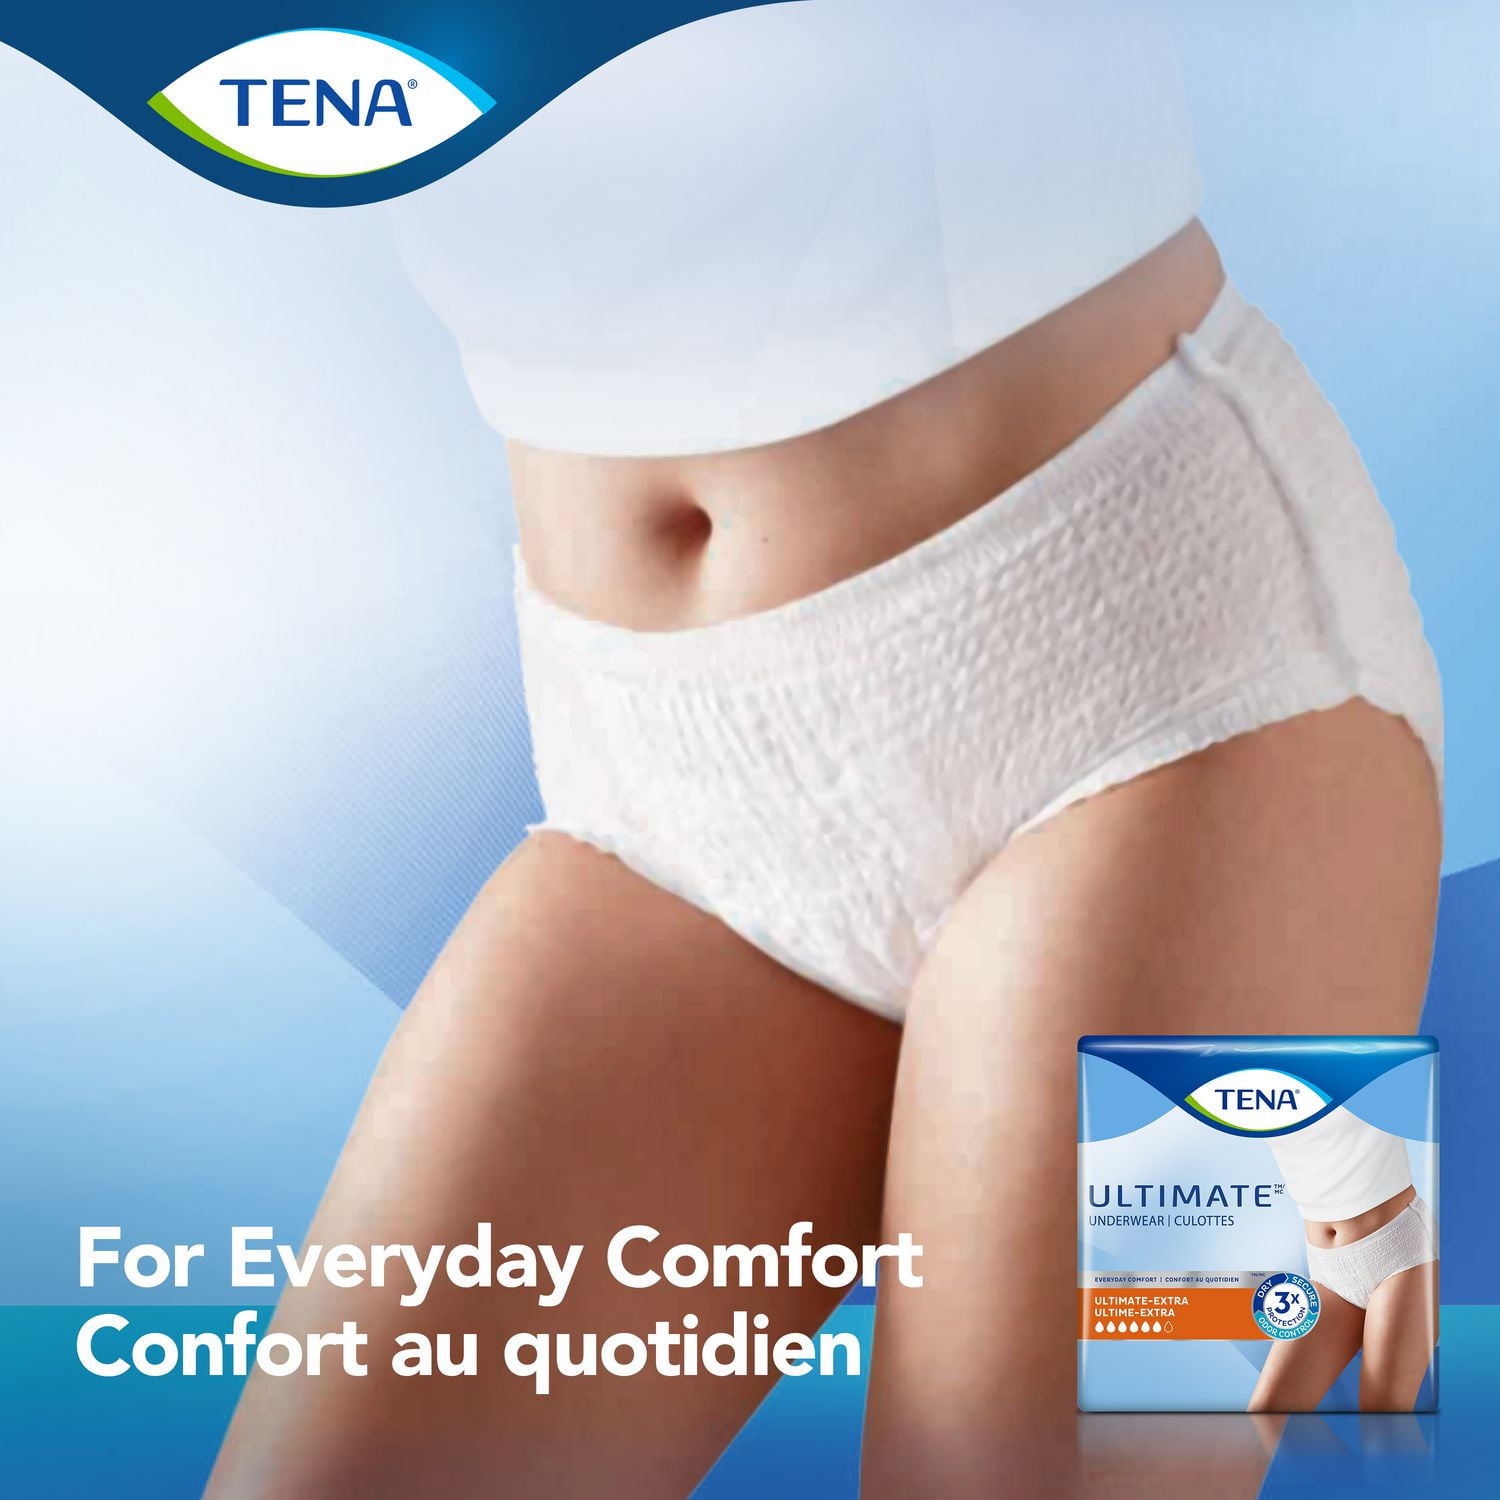 TENA® Plus Protective Incontinence Underwear, Plus Absorbency, Large